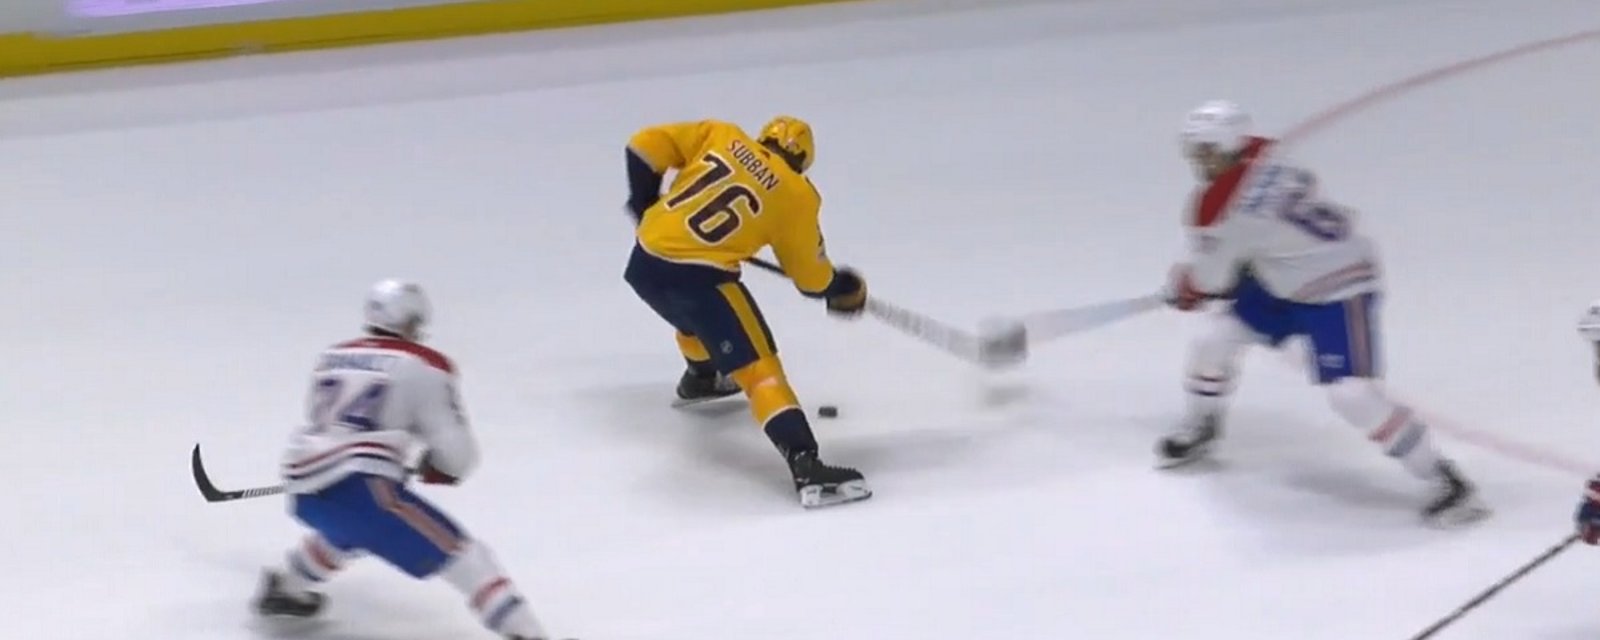 Subban dangles around his former captain to set up a buzzer beater.